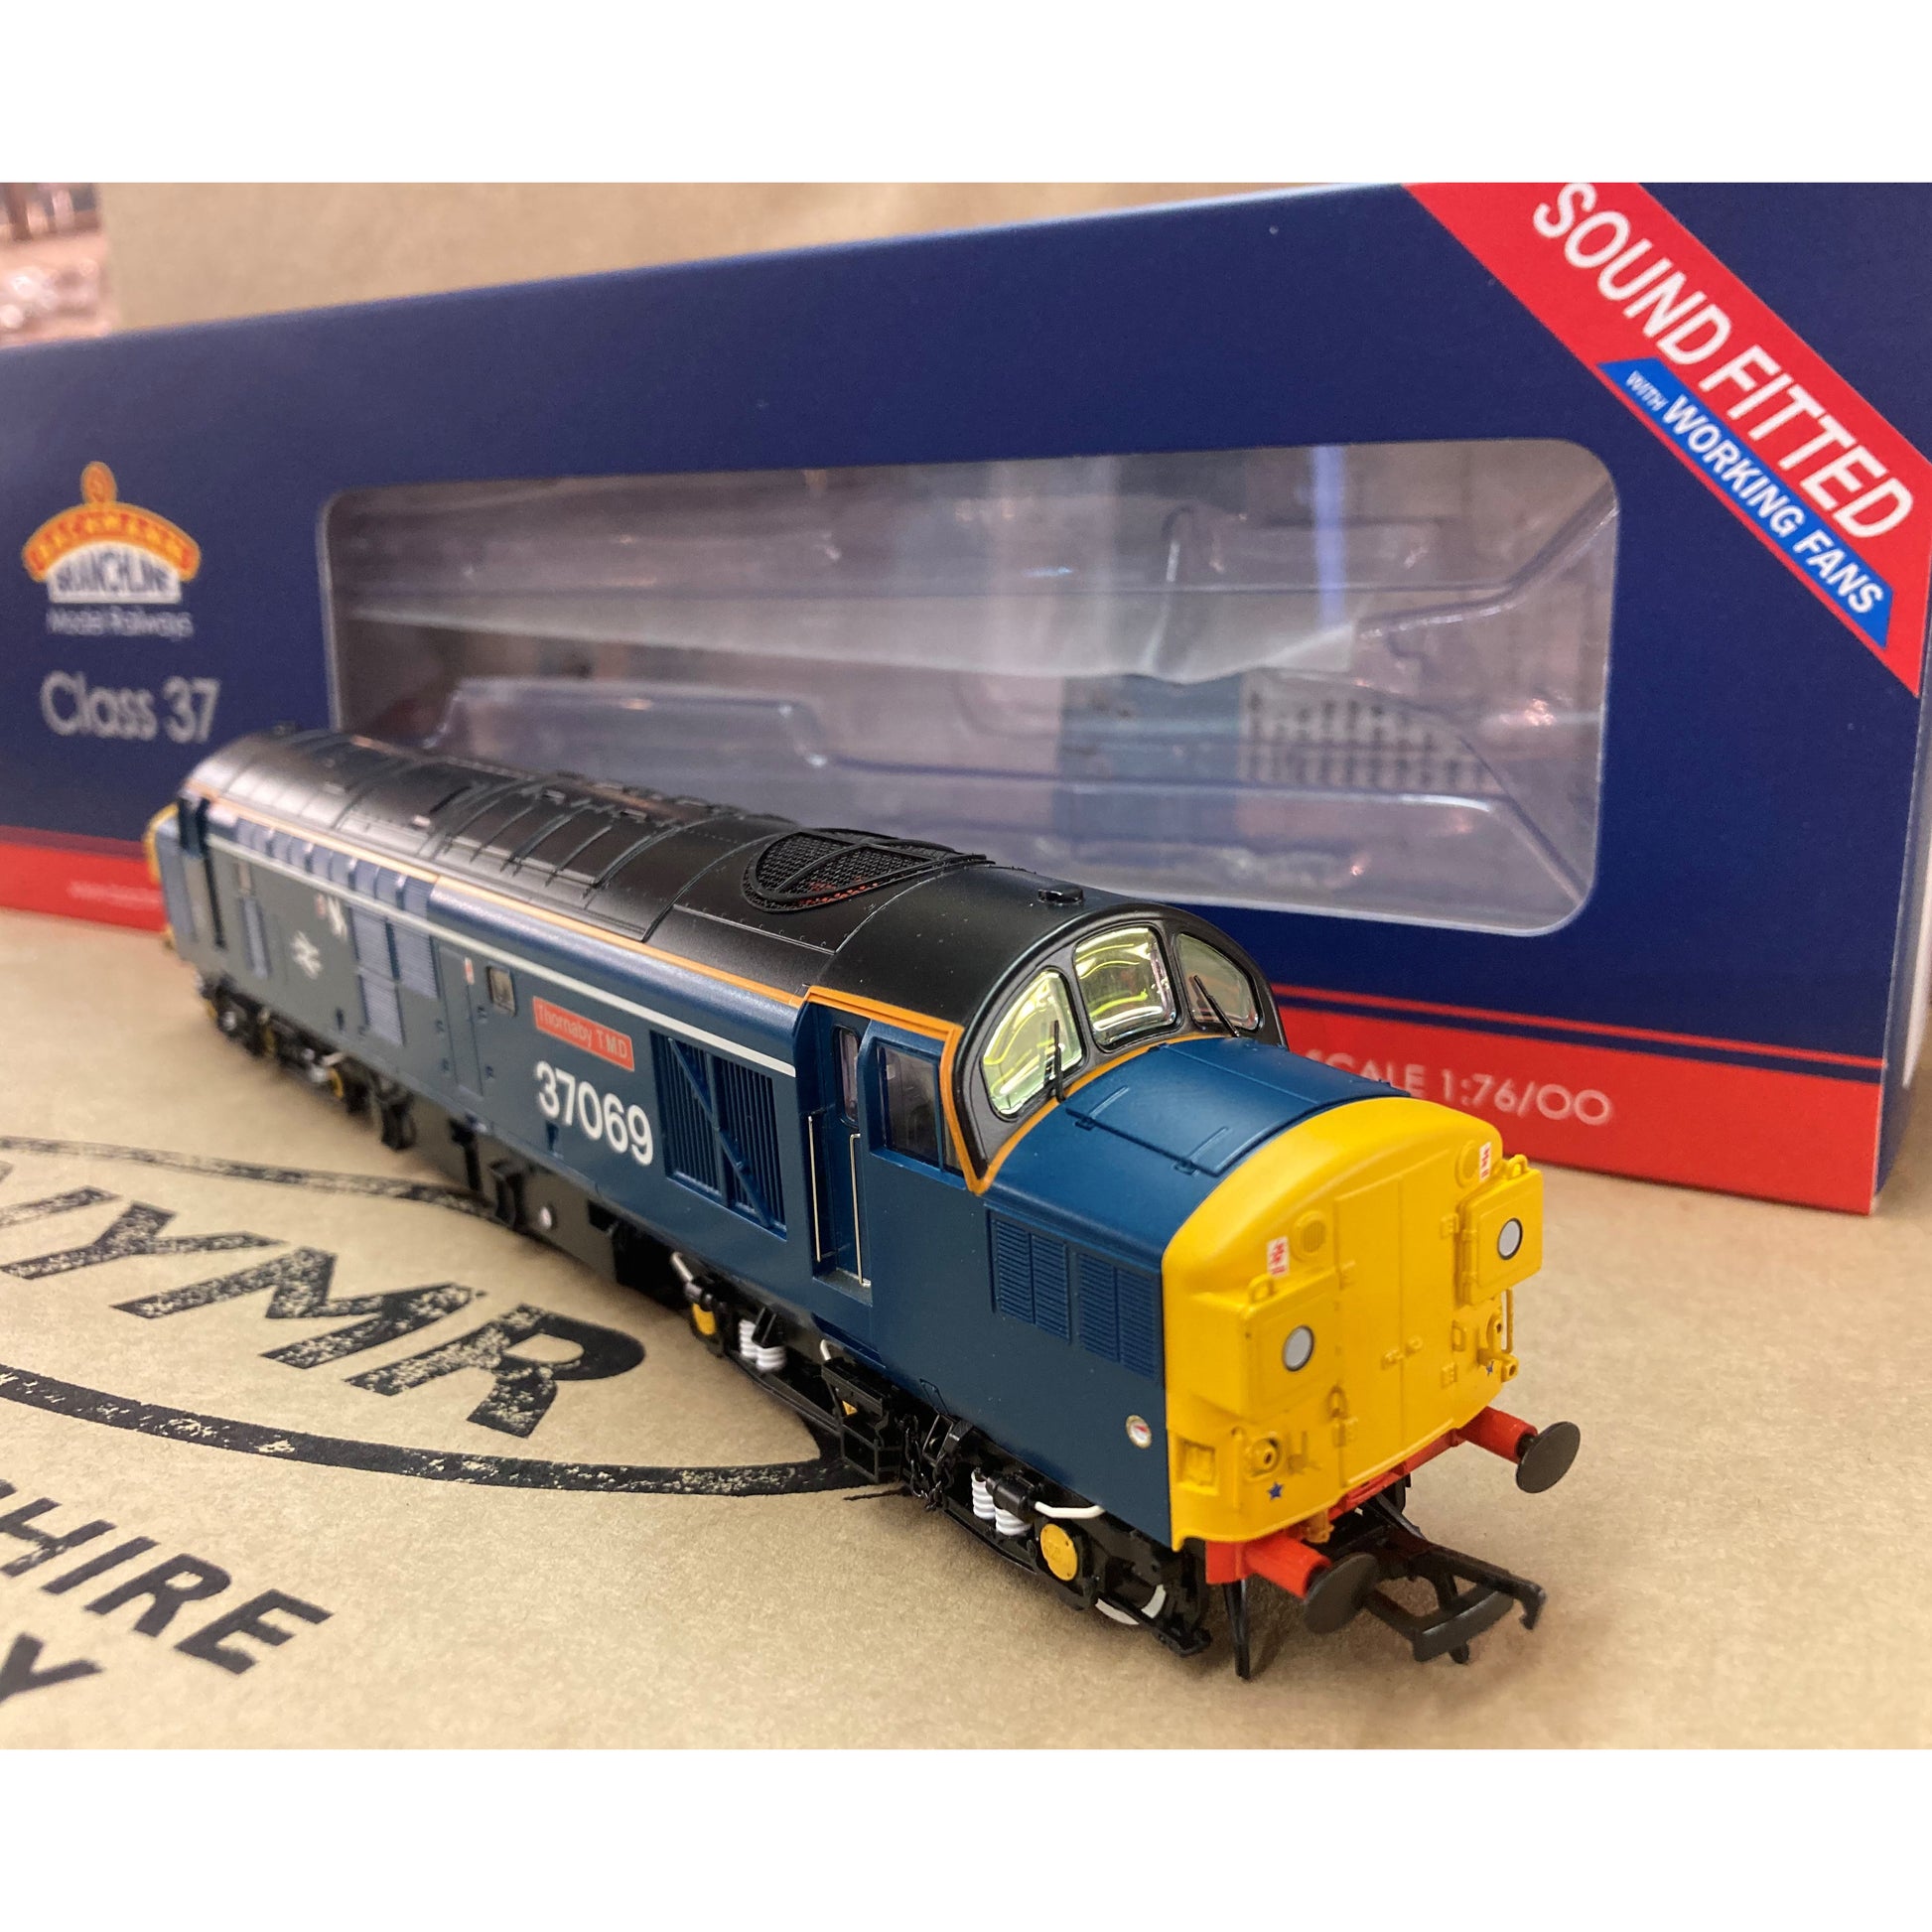 A super brand spanking new model loco out of the box to show you the shinyness of the finish. Box in background.